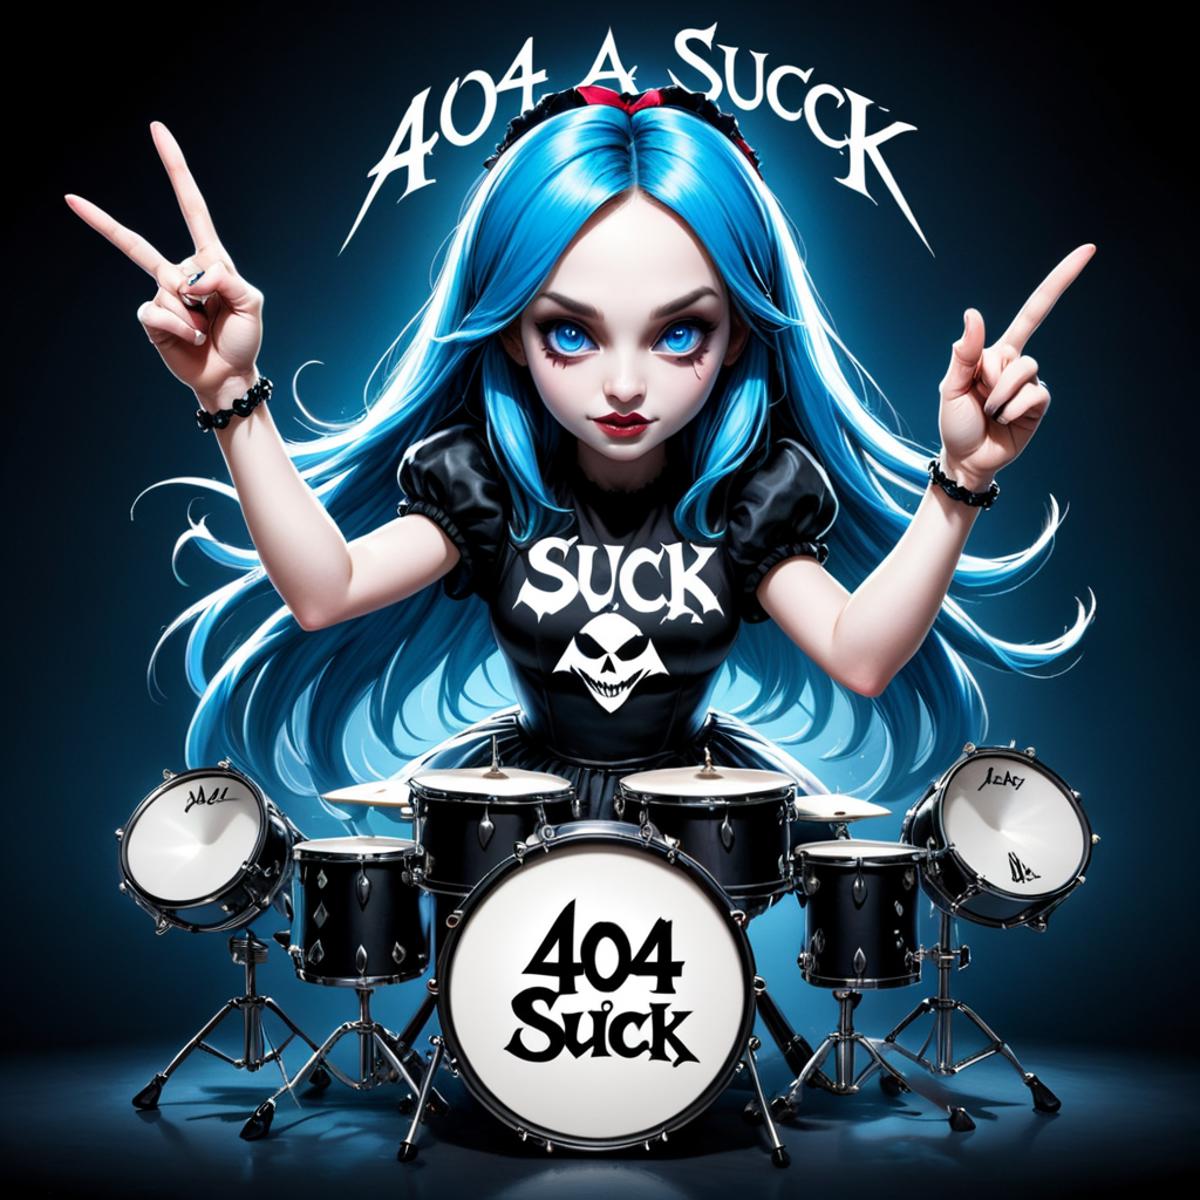 A cartoon girl drummer with blue hair and a shirt that says "suck" stands in front of a drum set.